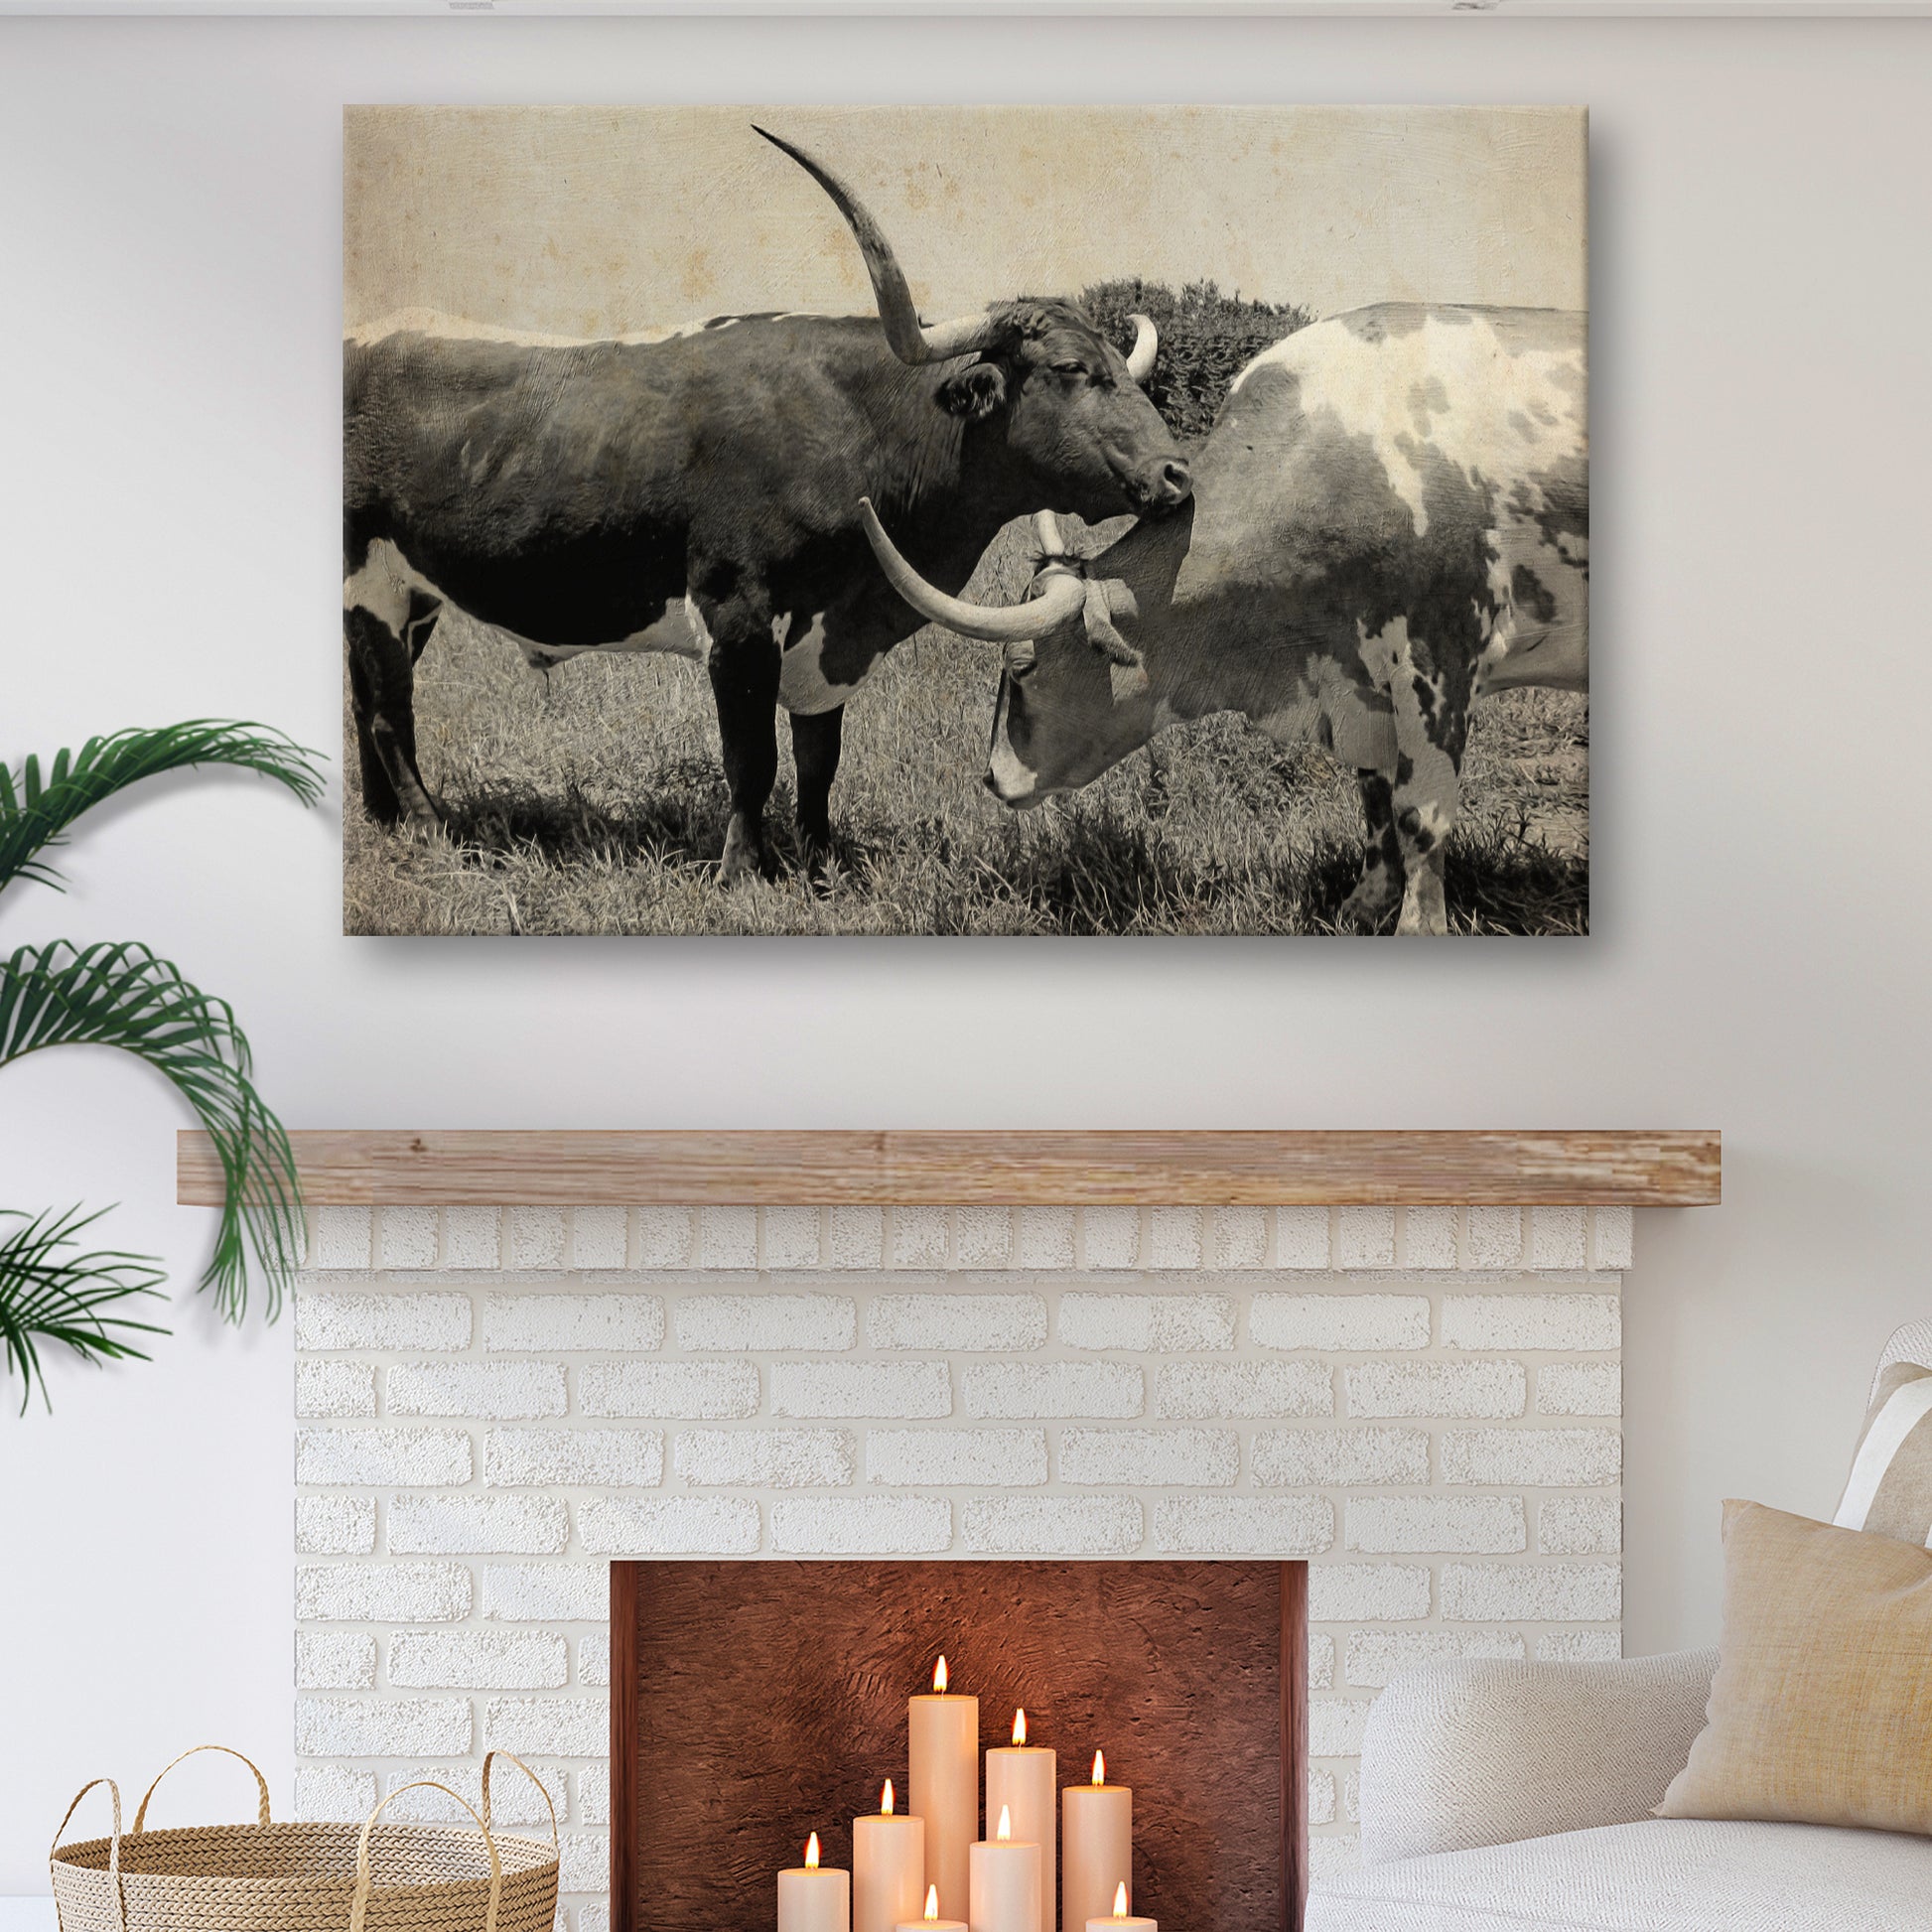 Rustic Longhorn Cattle Love Canvas Wall Art - Image by Tailored Canvases